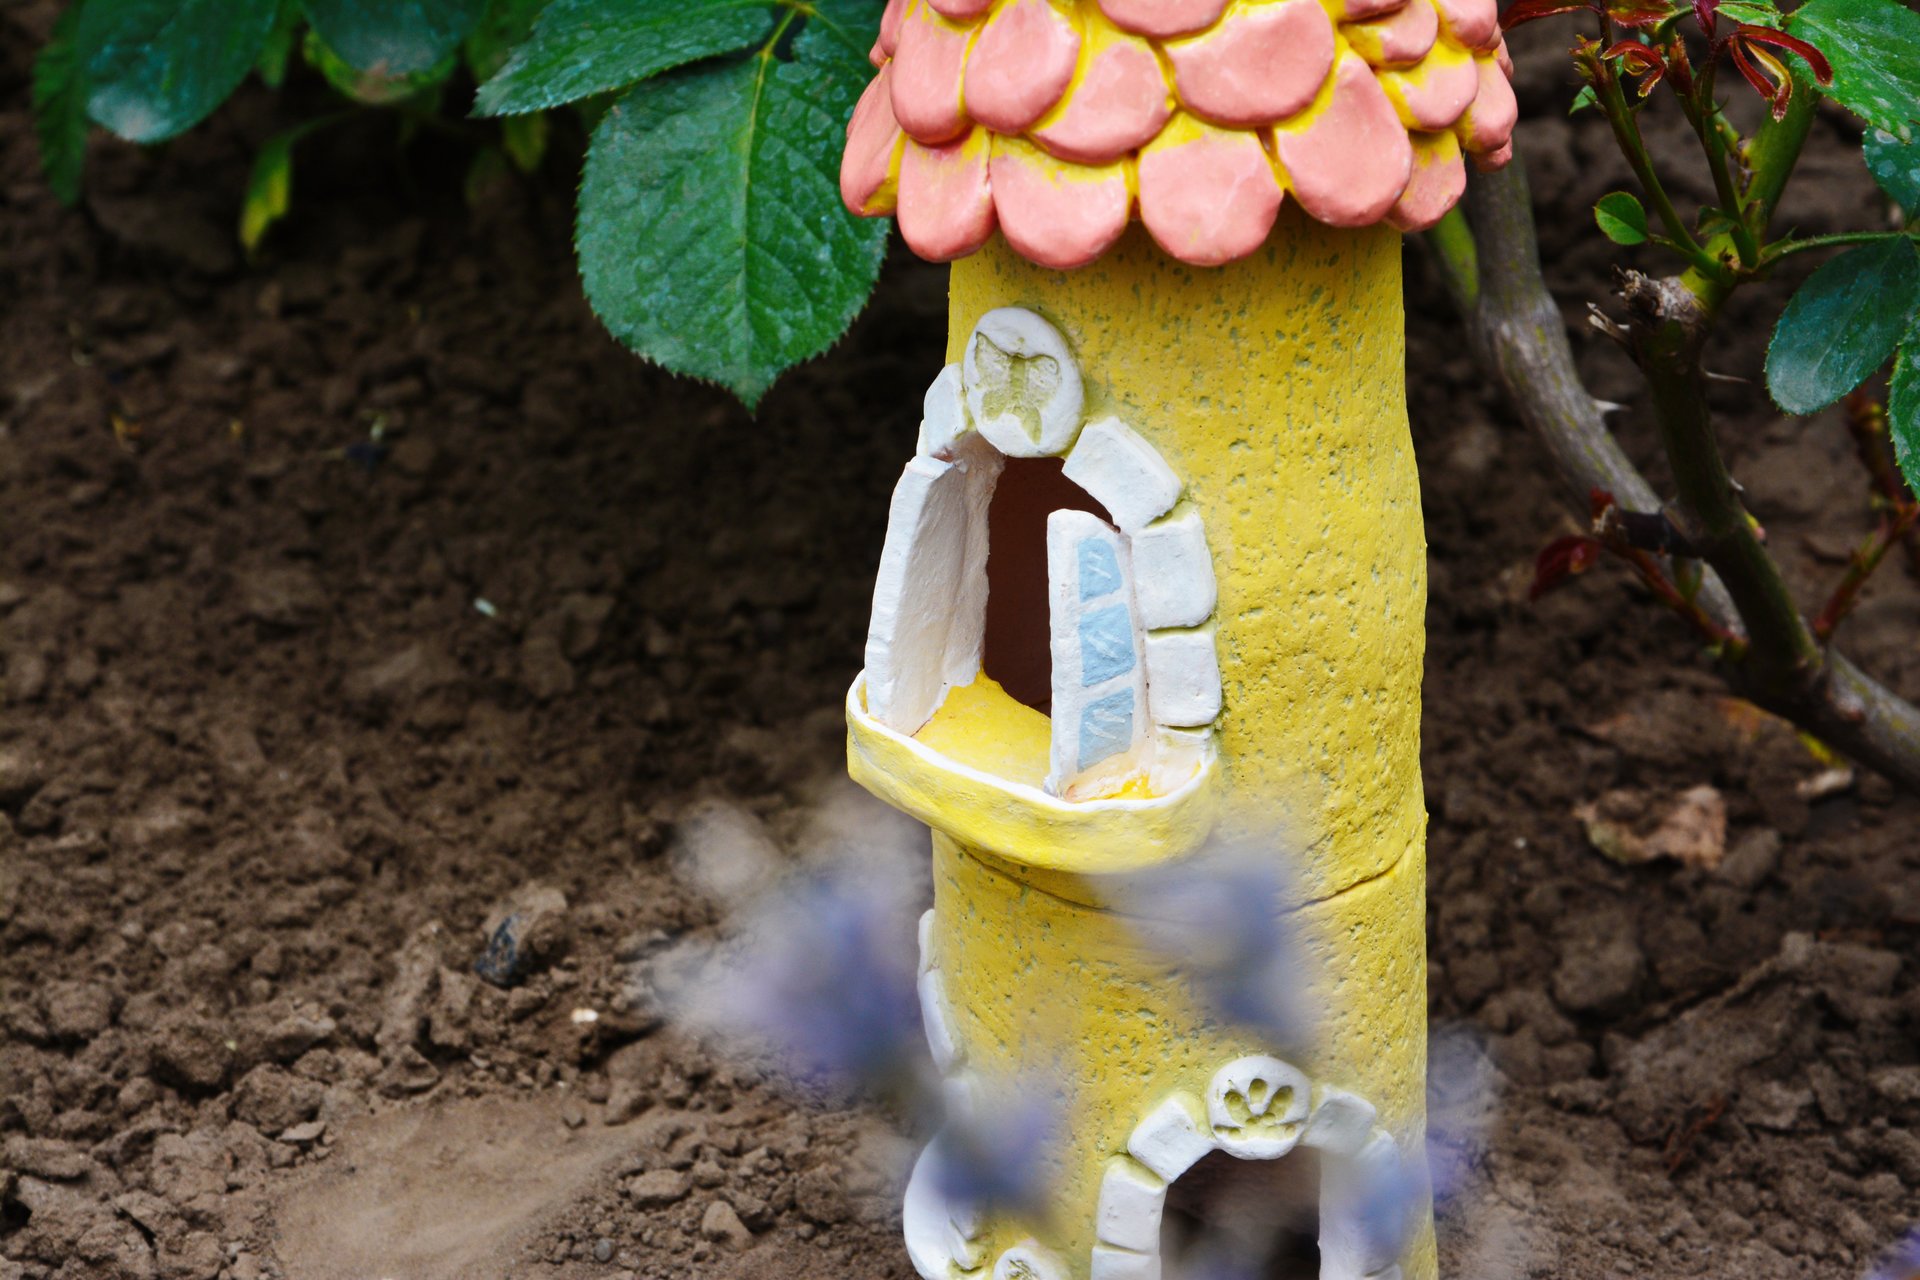 The Yellow Castle - Ceramic decorations for flowerbeds, lawns, height - 35 cm, photo 2 of 2.